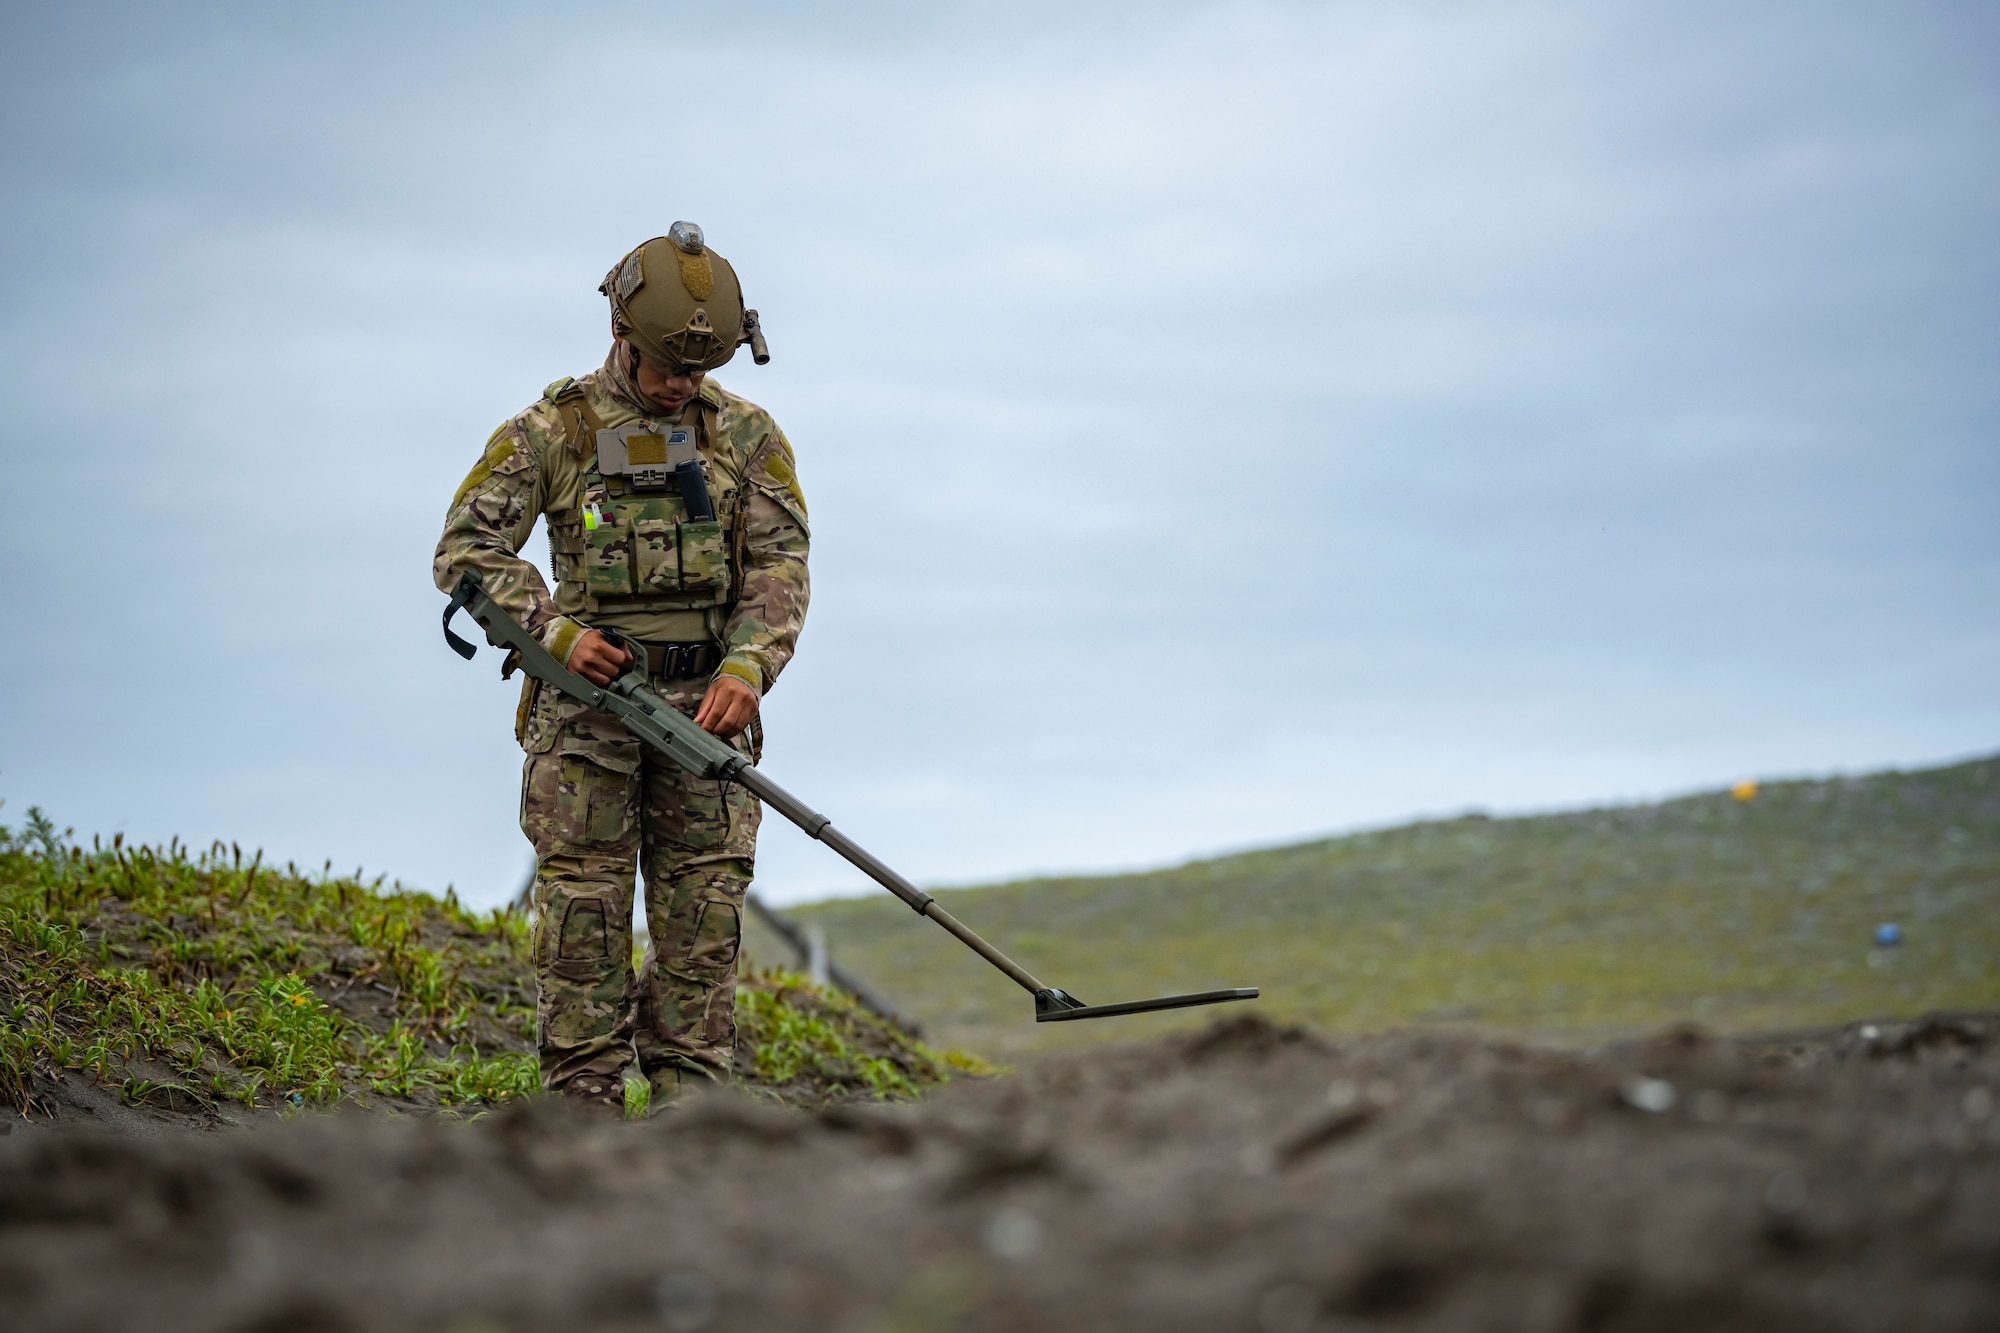 U.S. military member in tactical gear scans the ground with a metal detector.